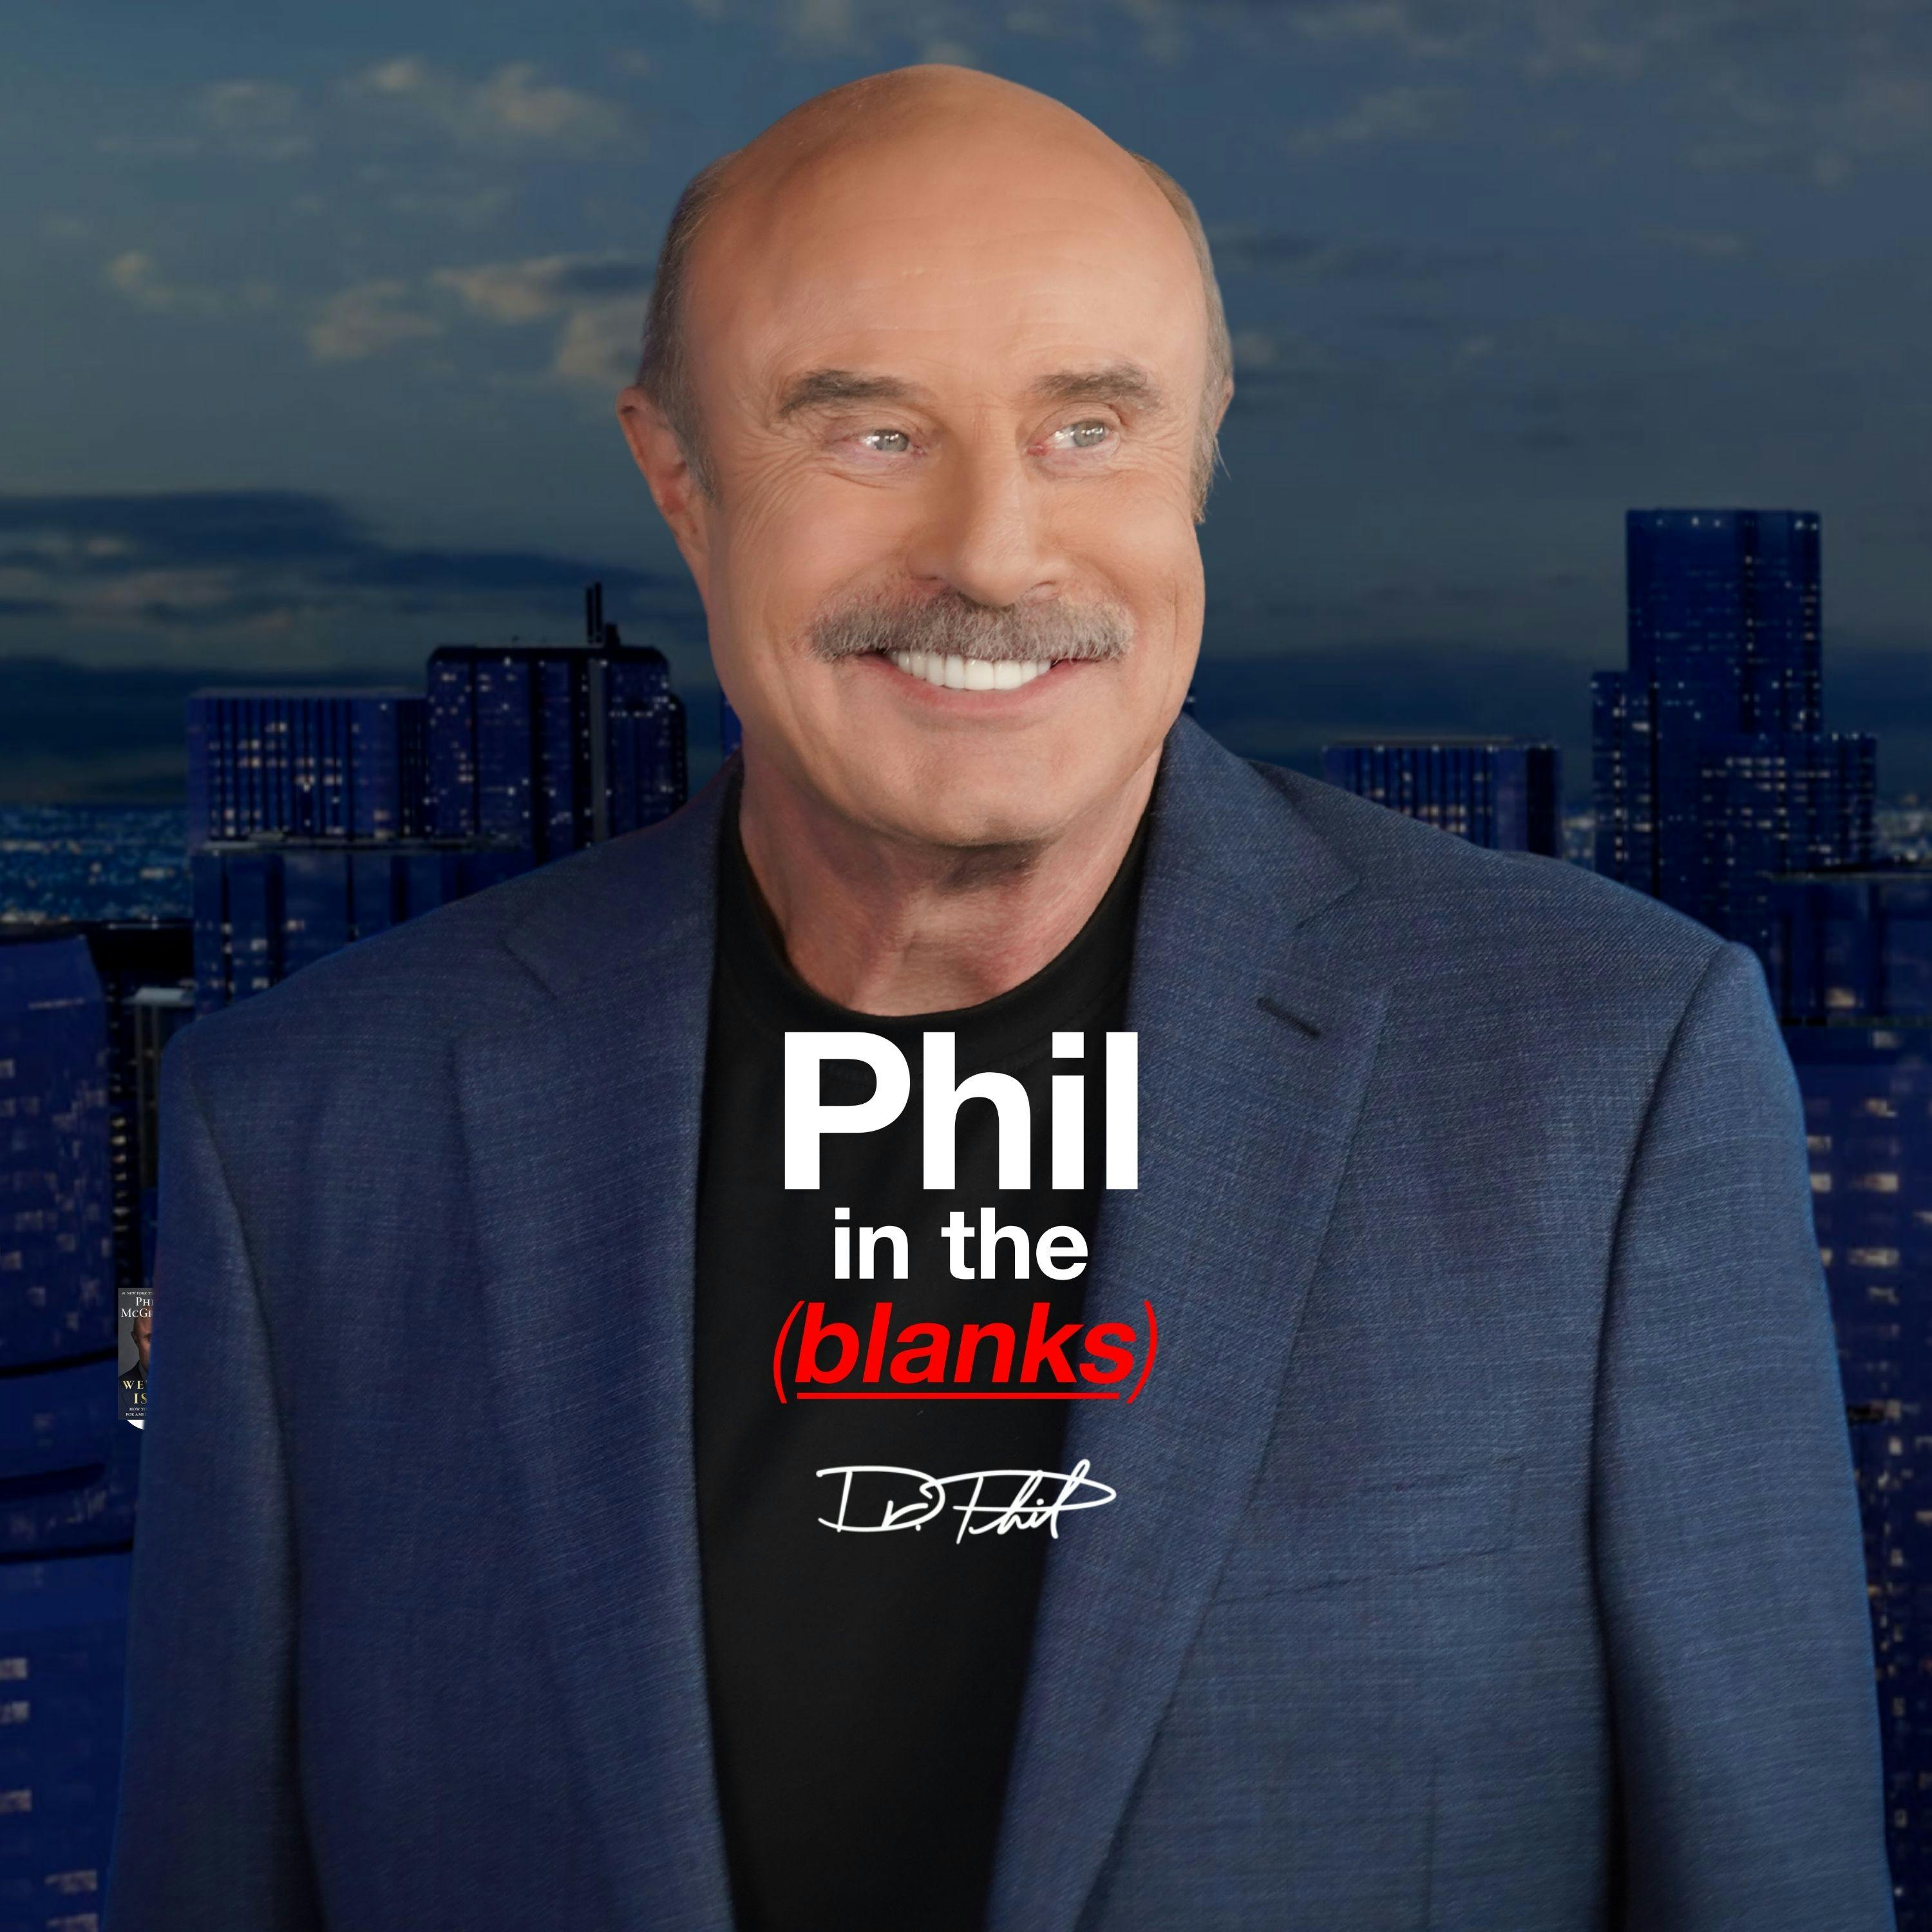 The Facts: Dr. Phil’s Hot Topics and Advice